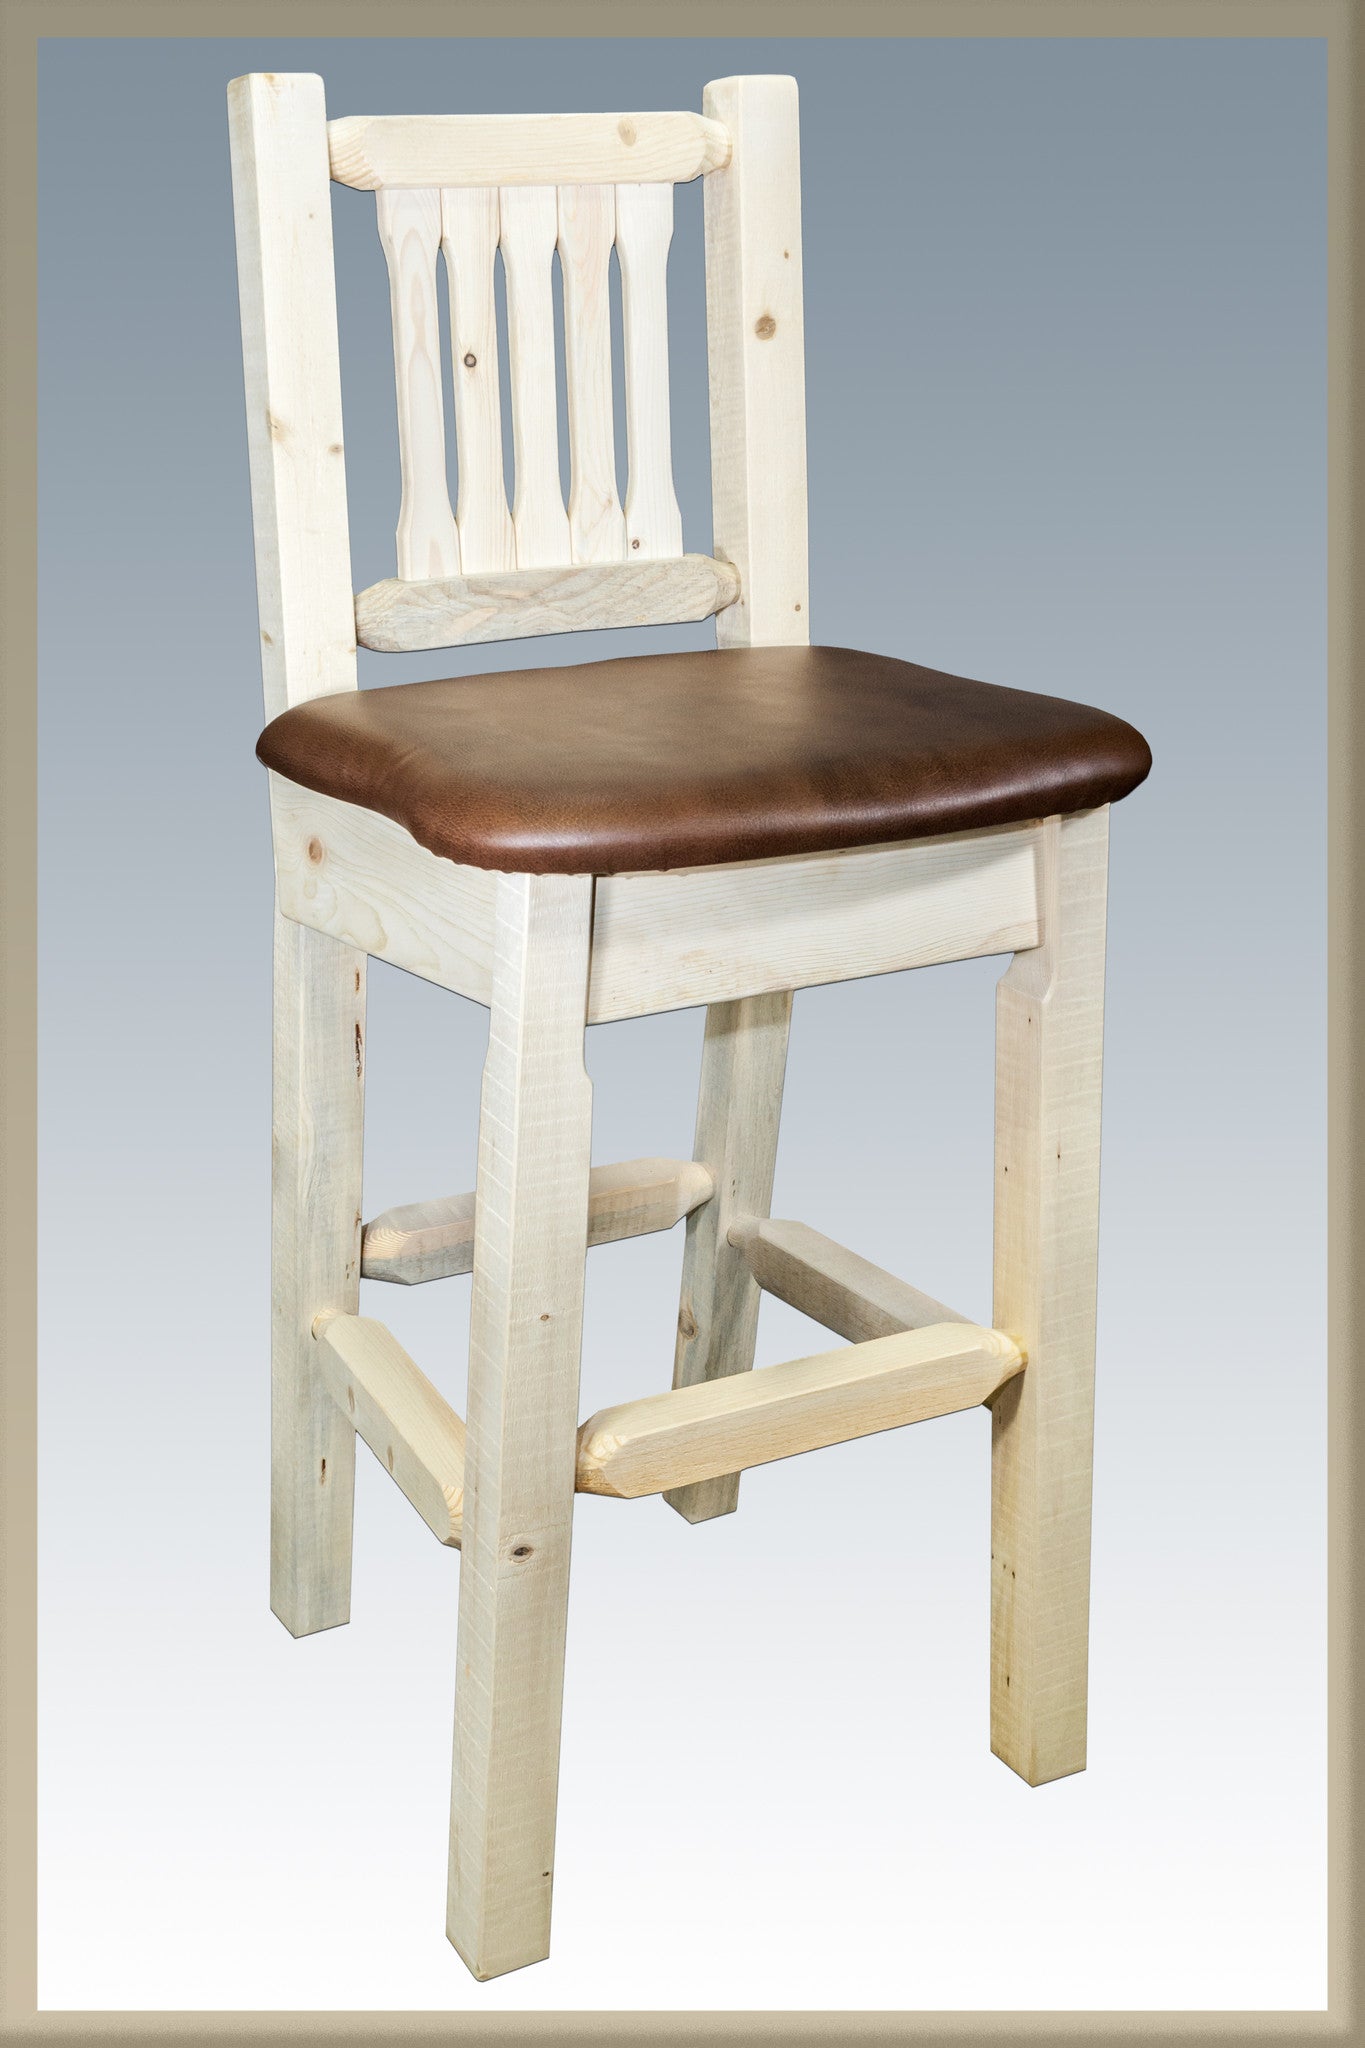 Montana Woodworks Homestead Collection Wood Barstool w/ Back w/ Upholstered Seat, Saddle Pattern